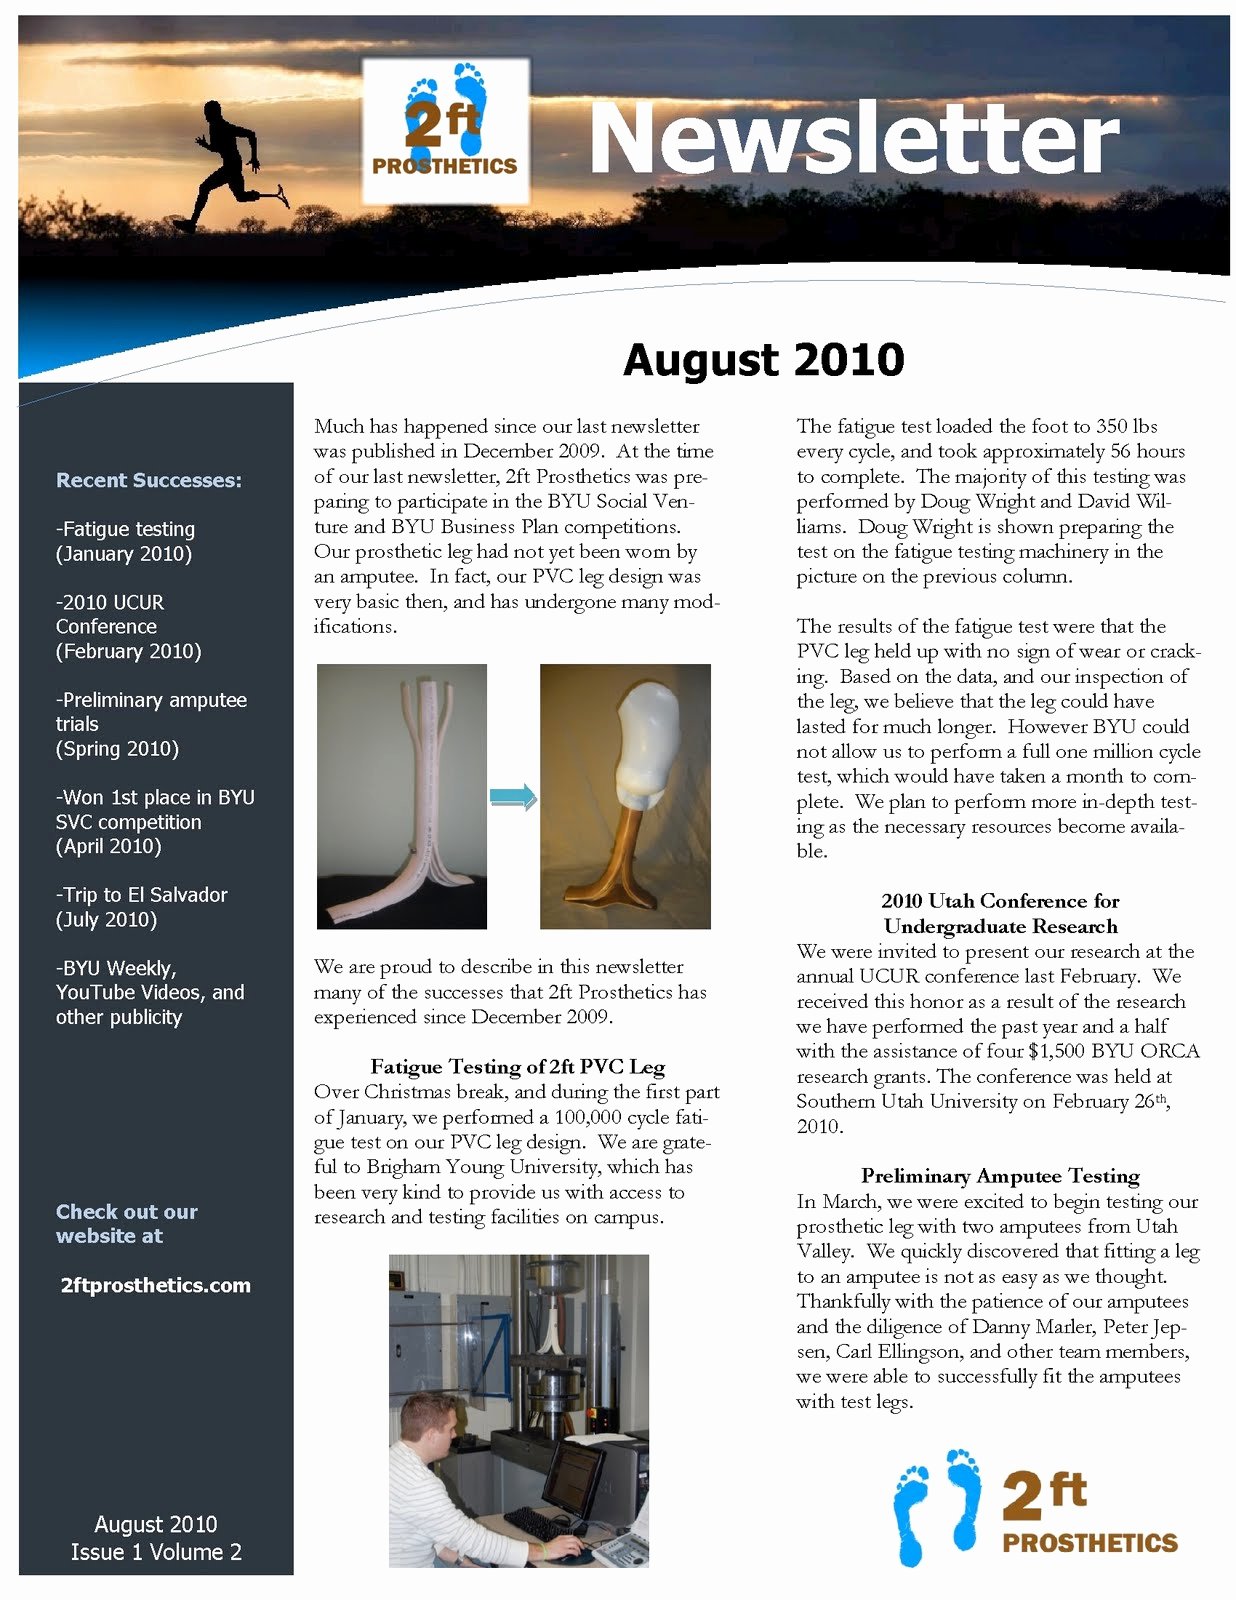 Newsletter Templates for Microsoft Word